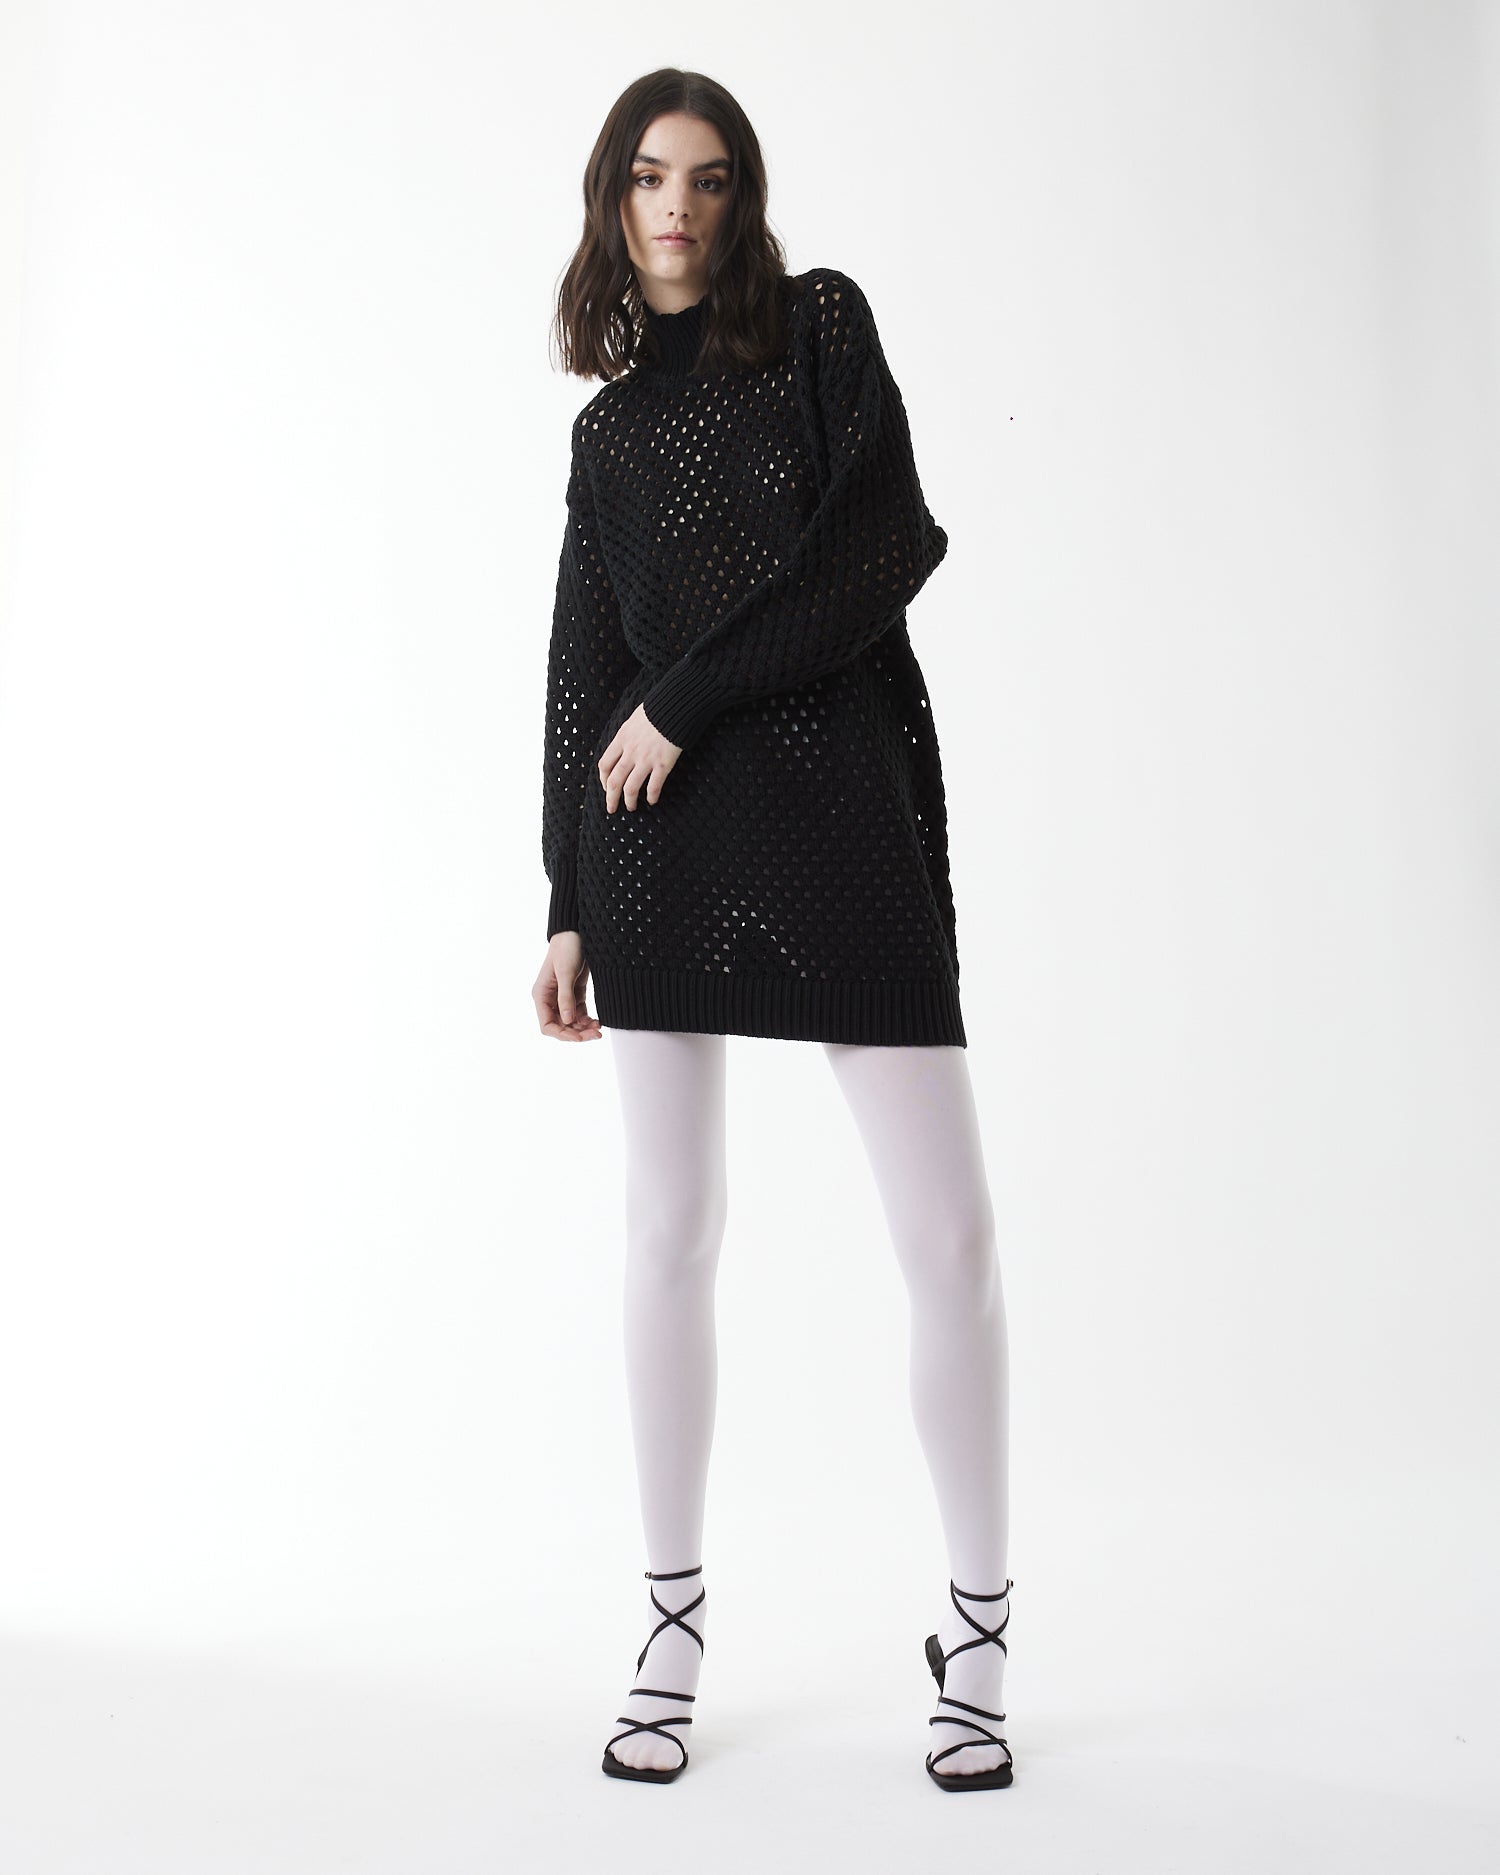 Perforated knit dress